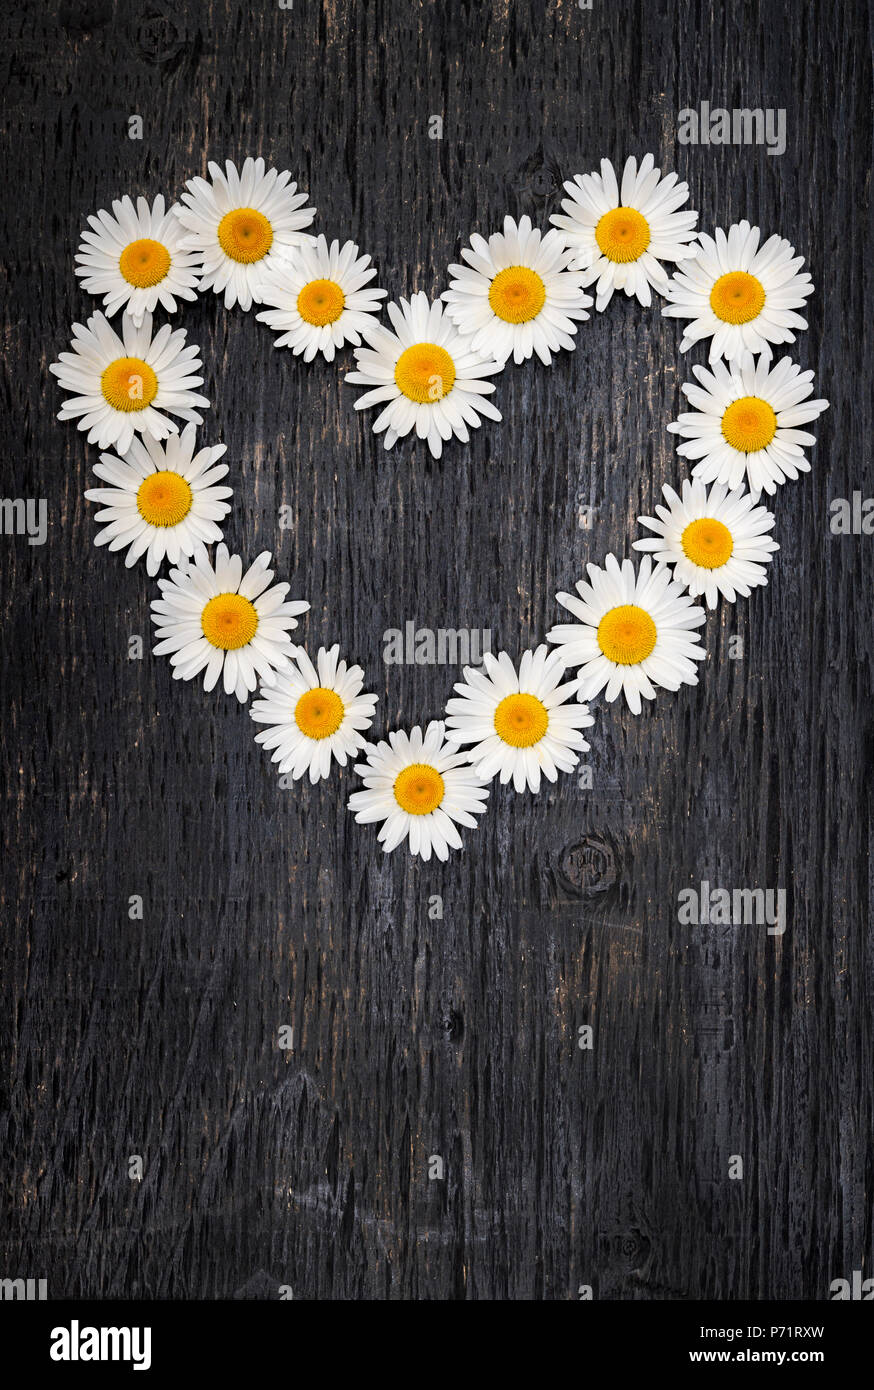 Heart shape of oxeye daisies on dark distressed wood background with copy space Stock Photo